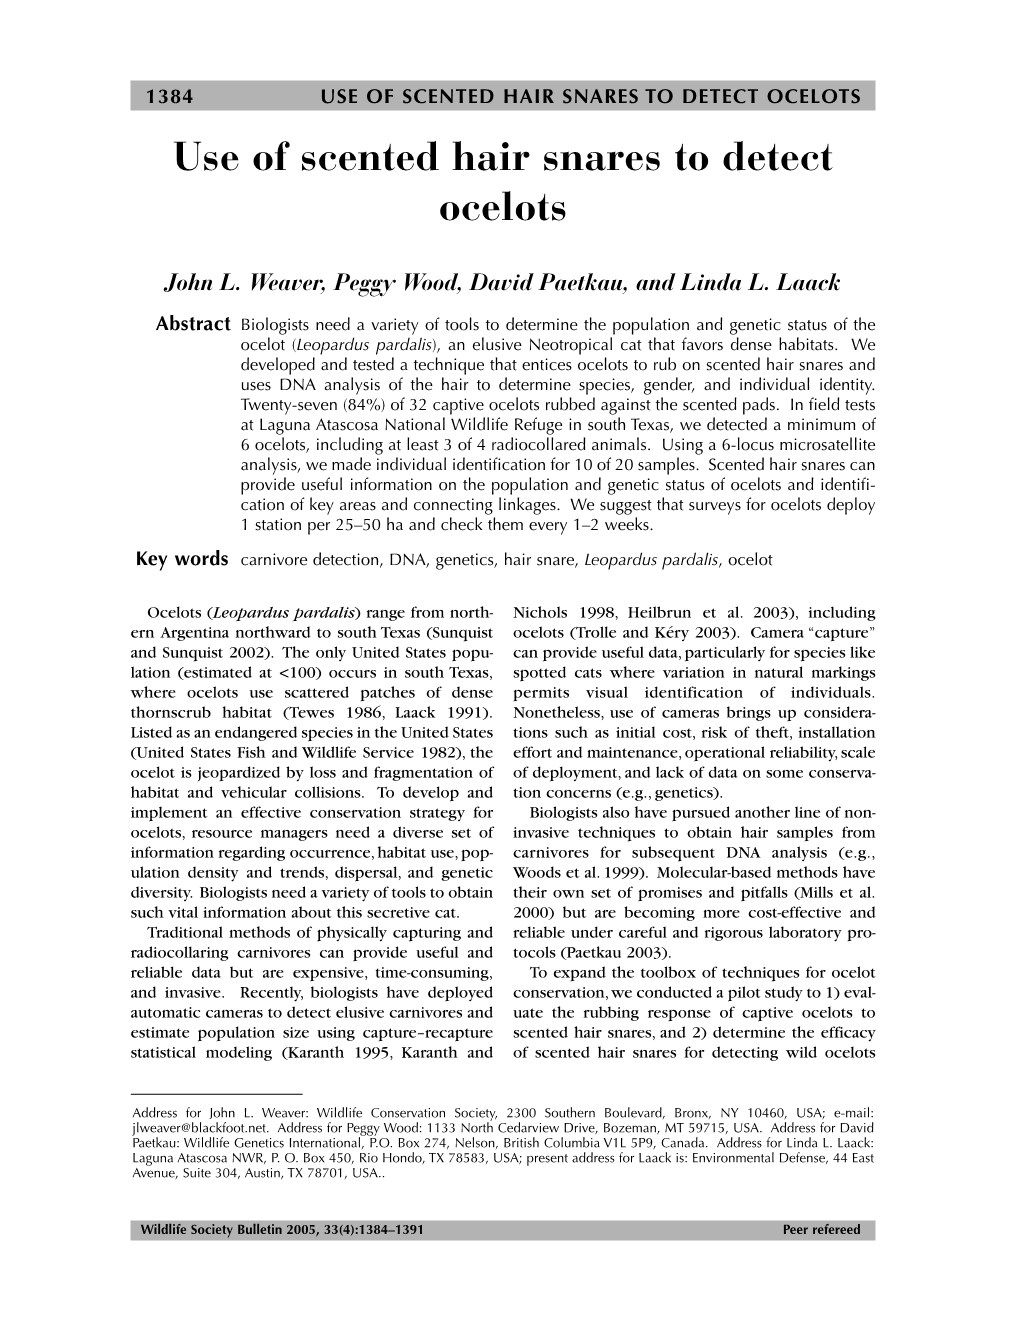 USE of SCENTED HAIR SNARES to DETECT OCELOTS Use of Scented Hair Snares to Detect Ocelots